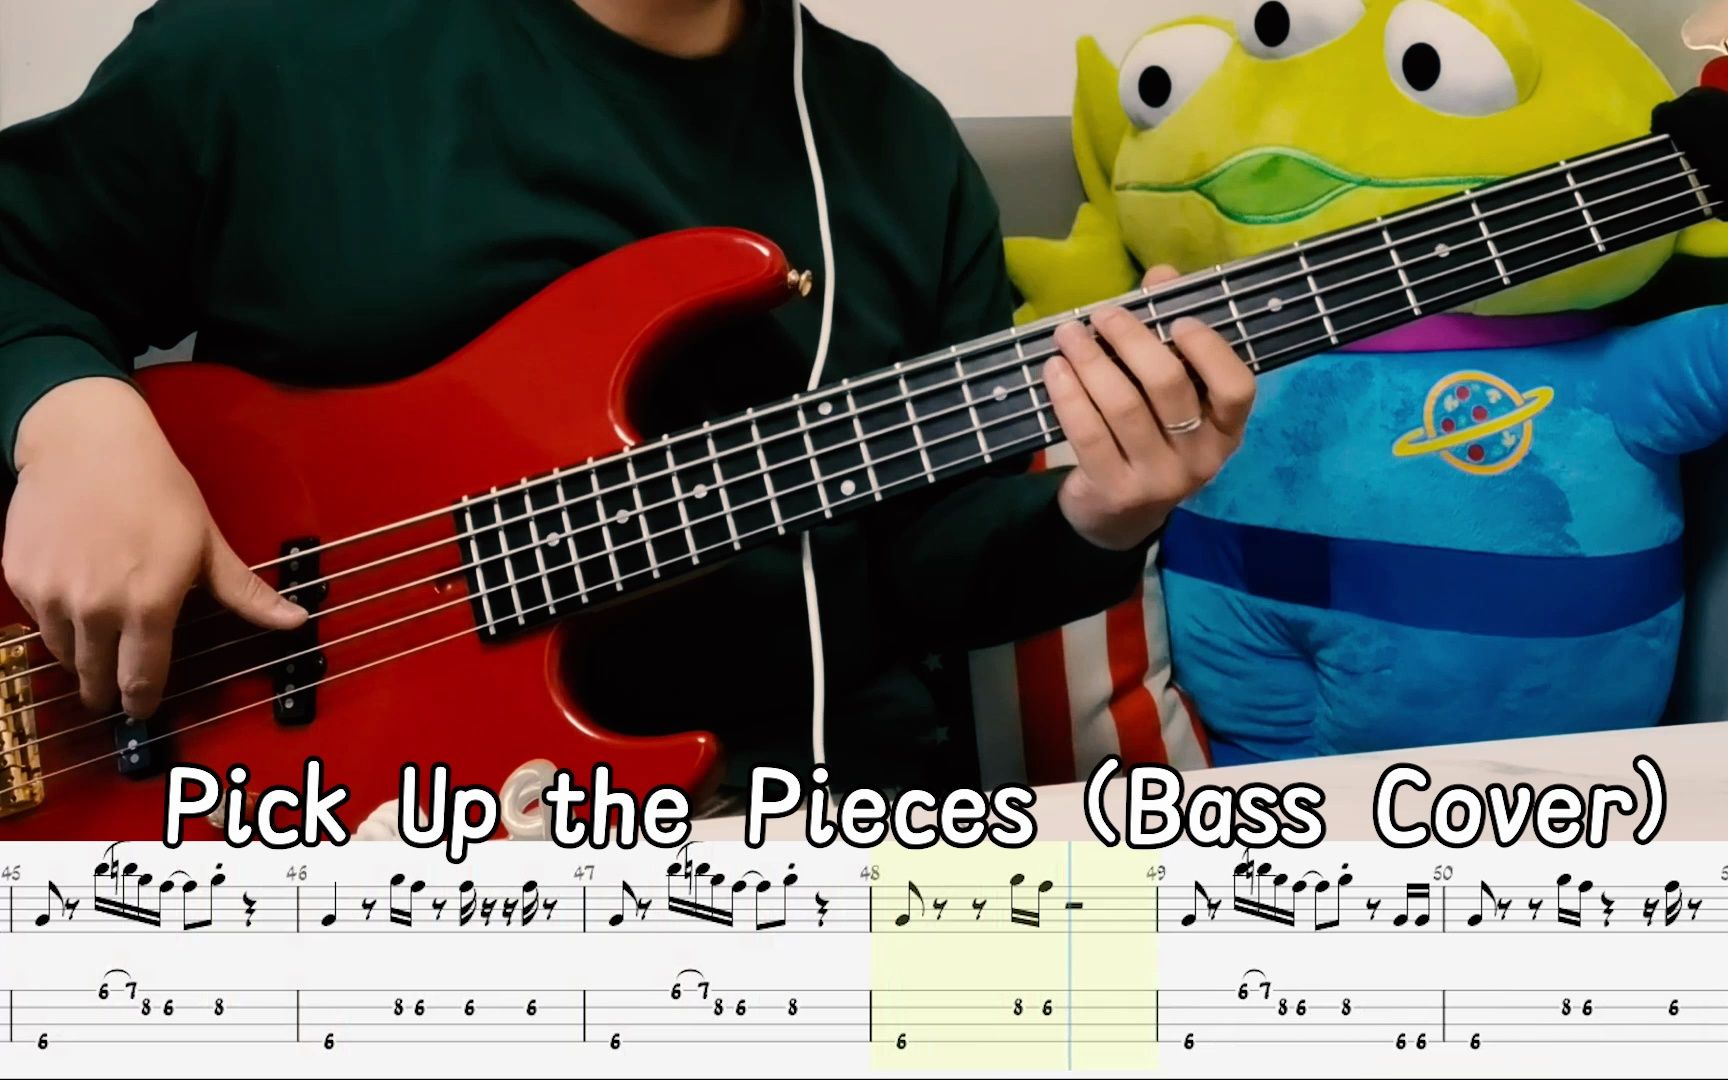 Pick Up the Pieces(Bass Cover)